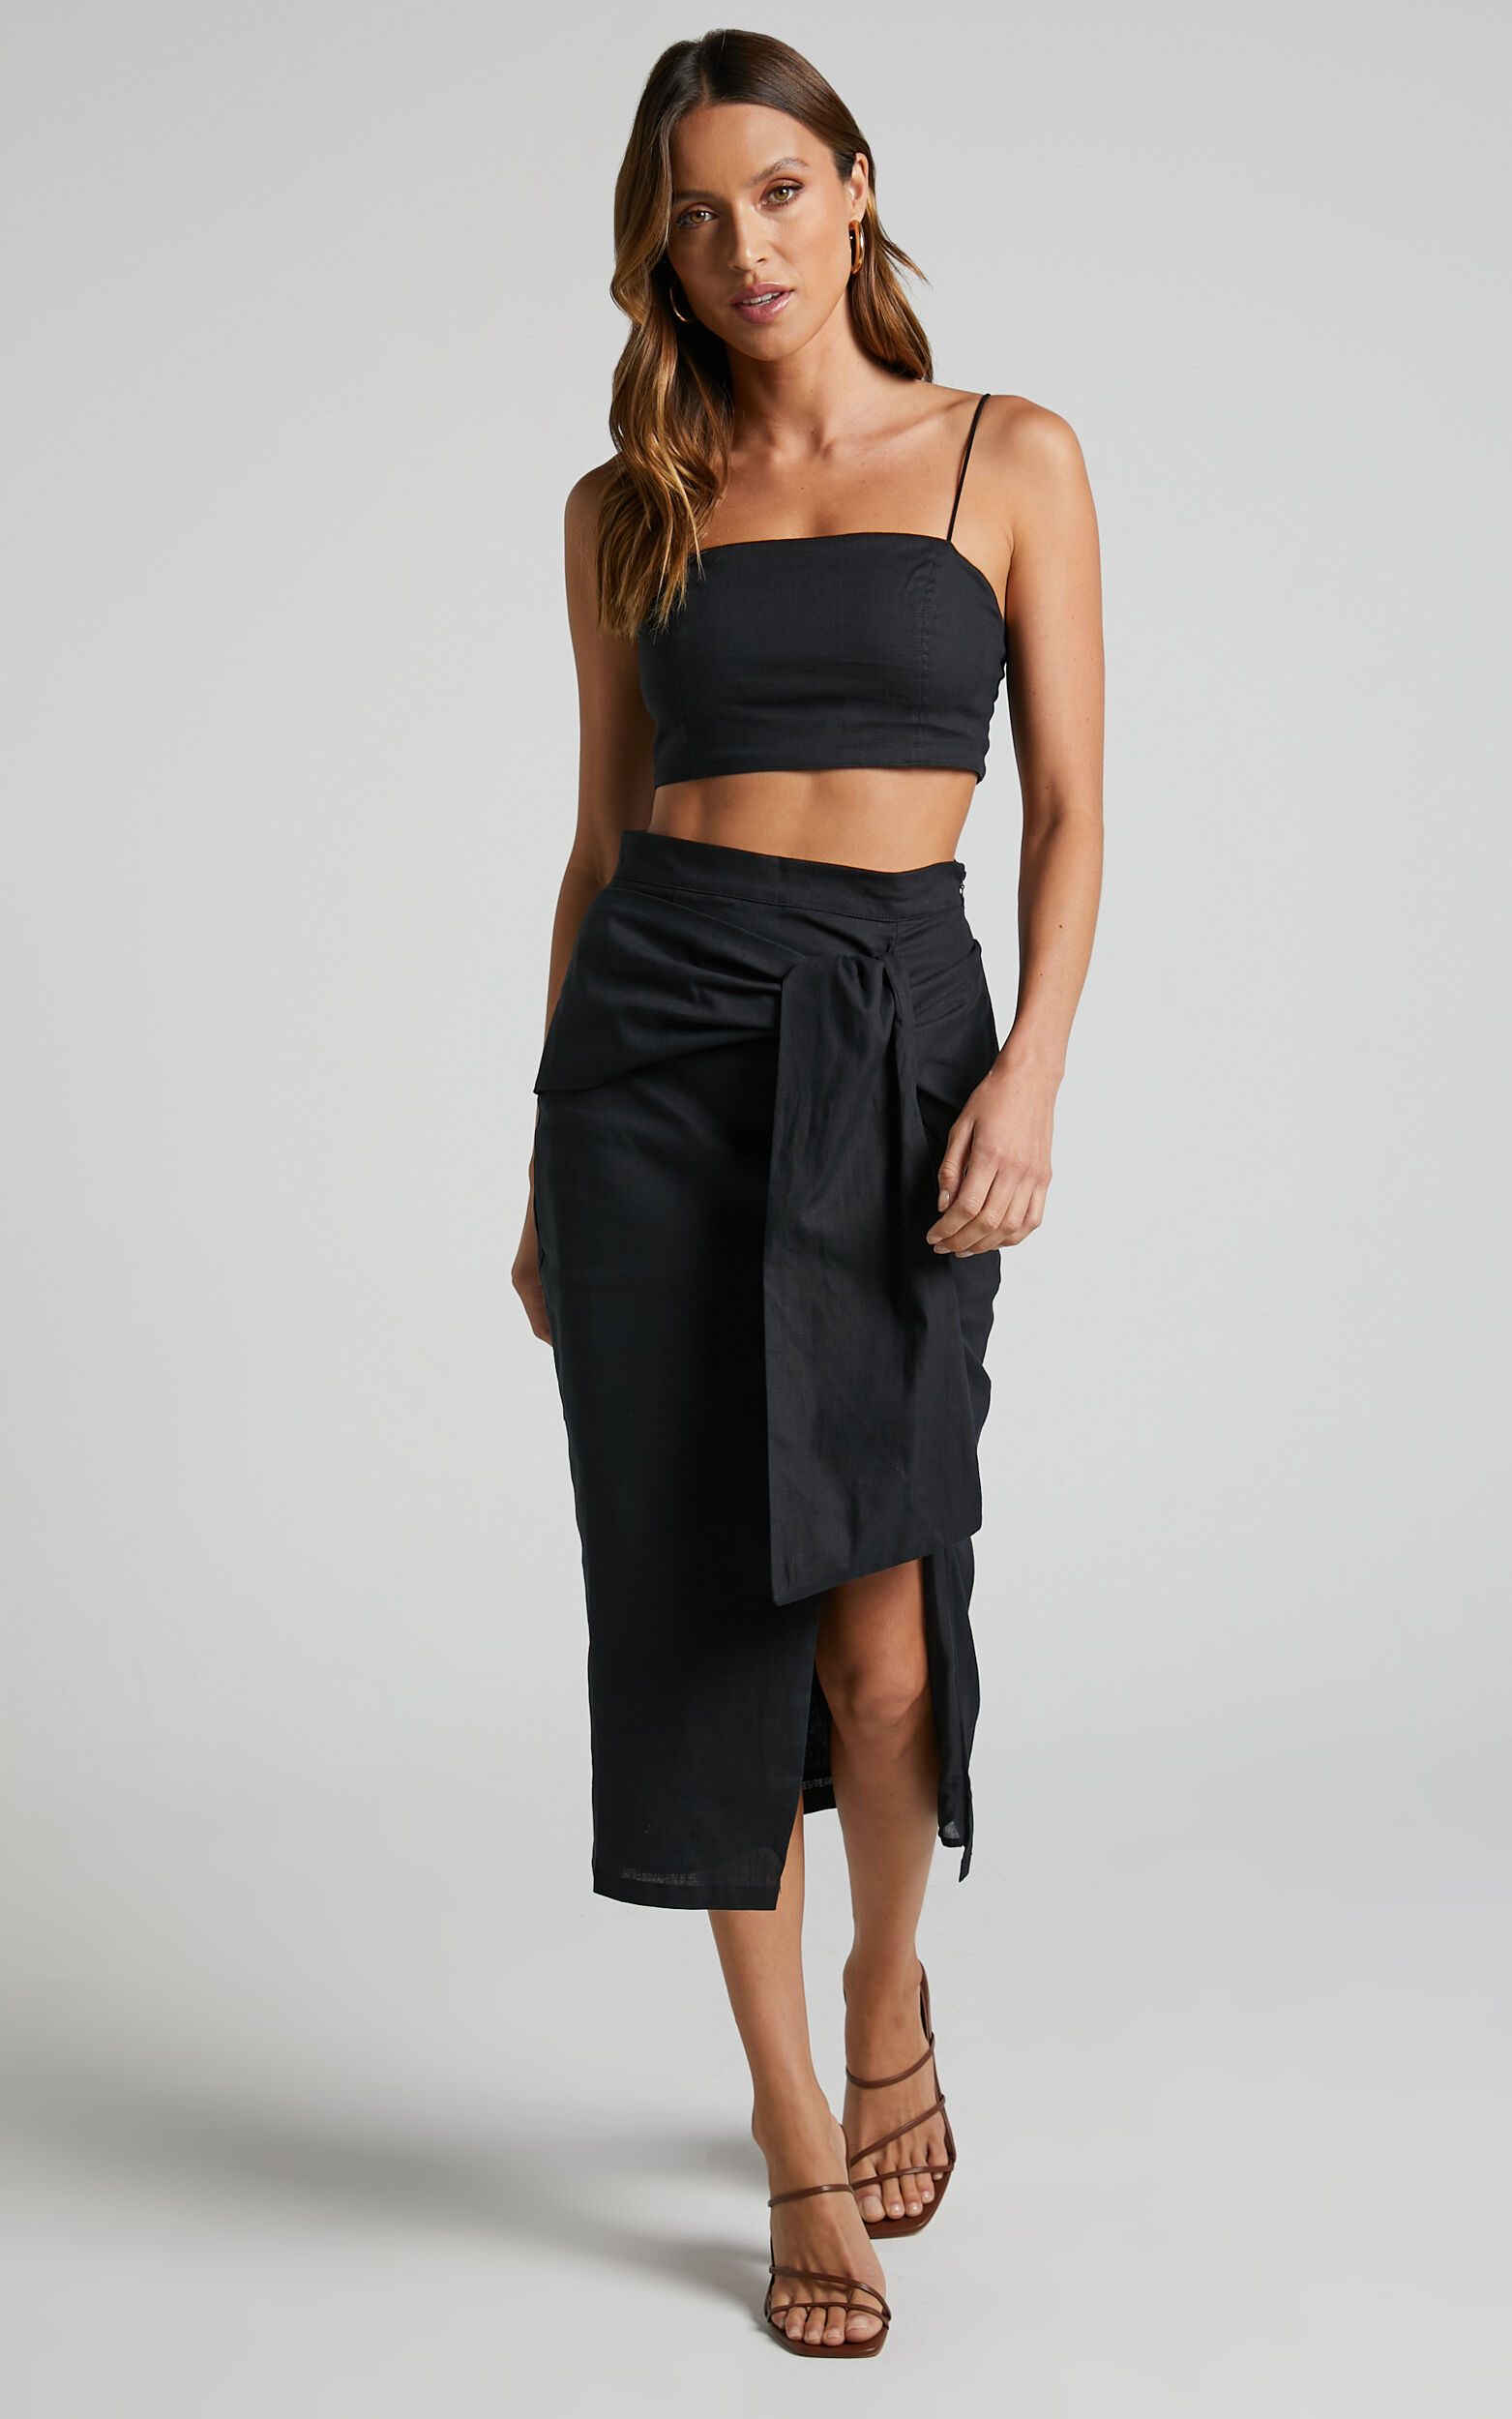 Jonessa Square Neck and Twist Skirt Two Piece Set in Black - 06, BLK1, super-hi-res image number null